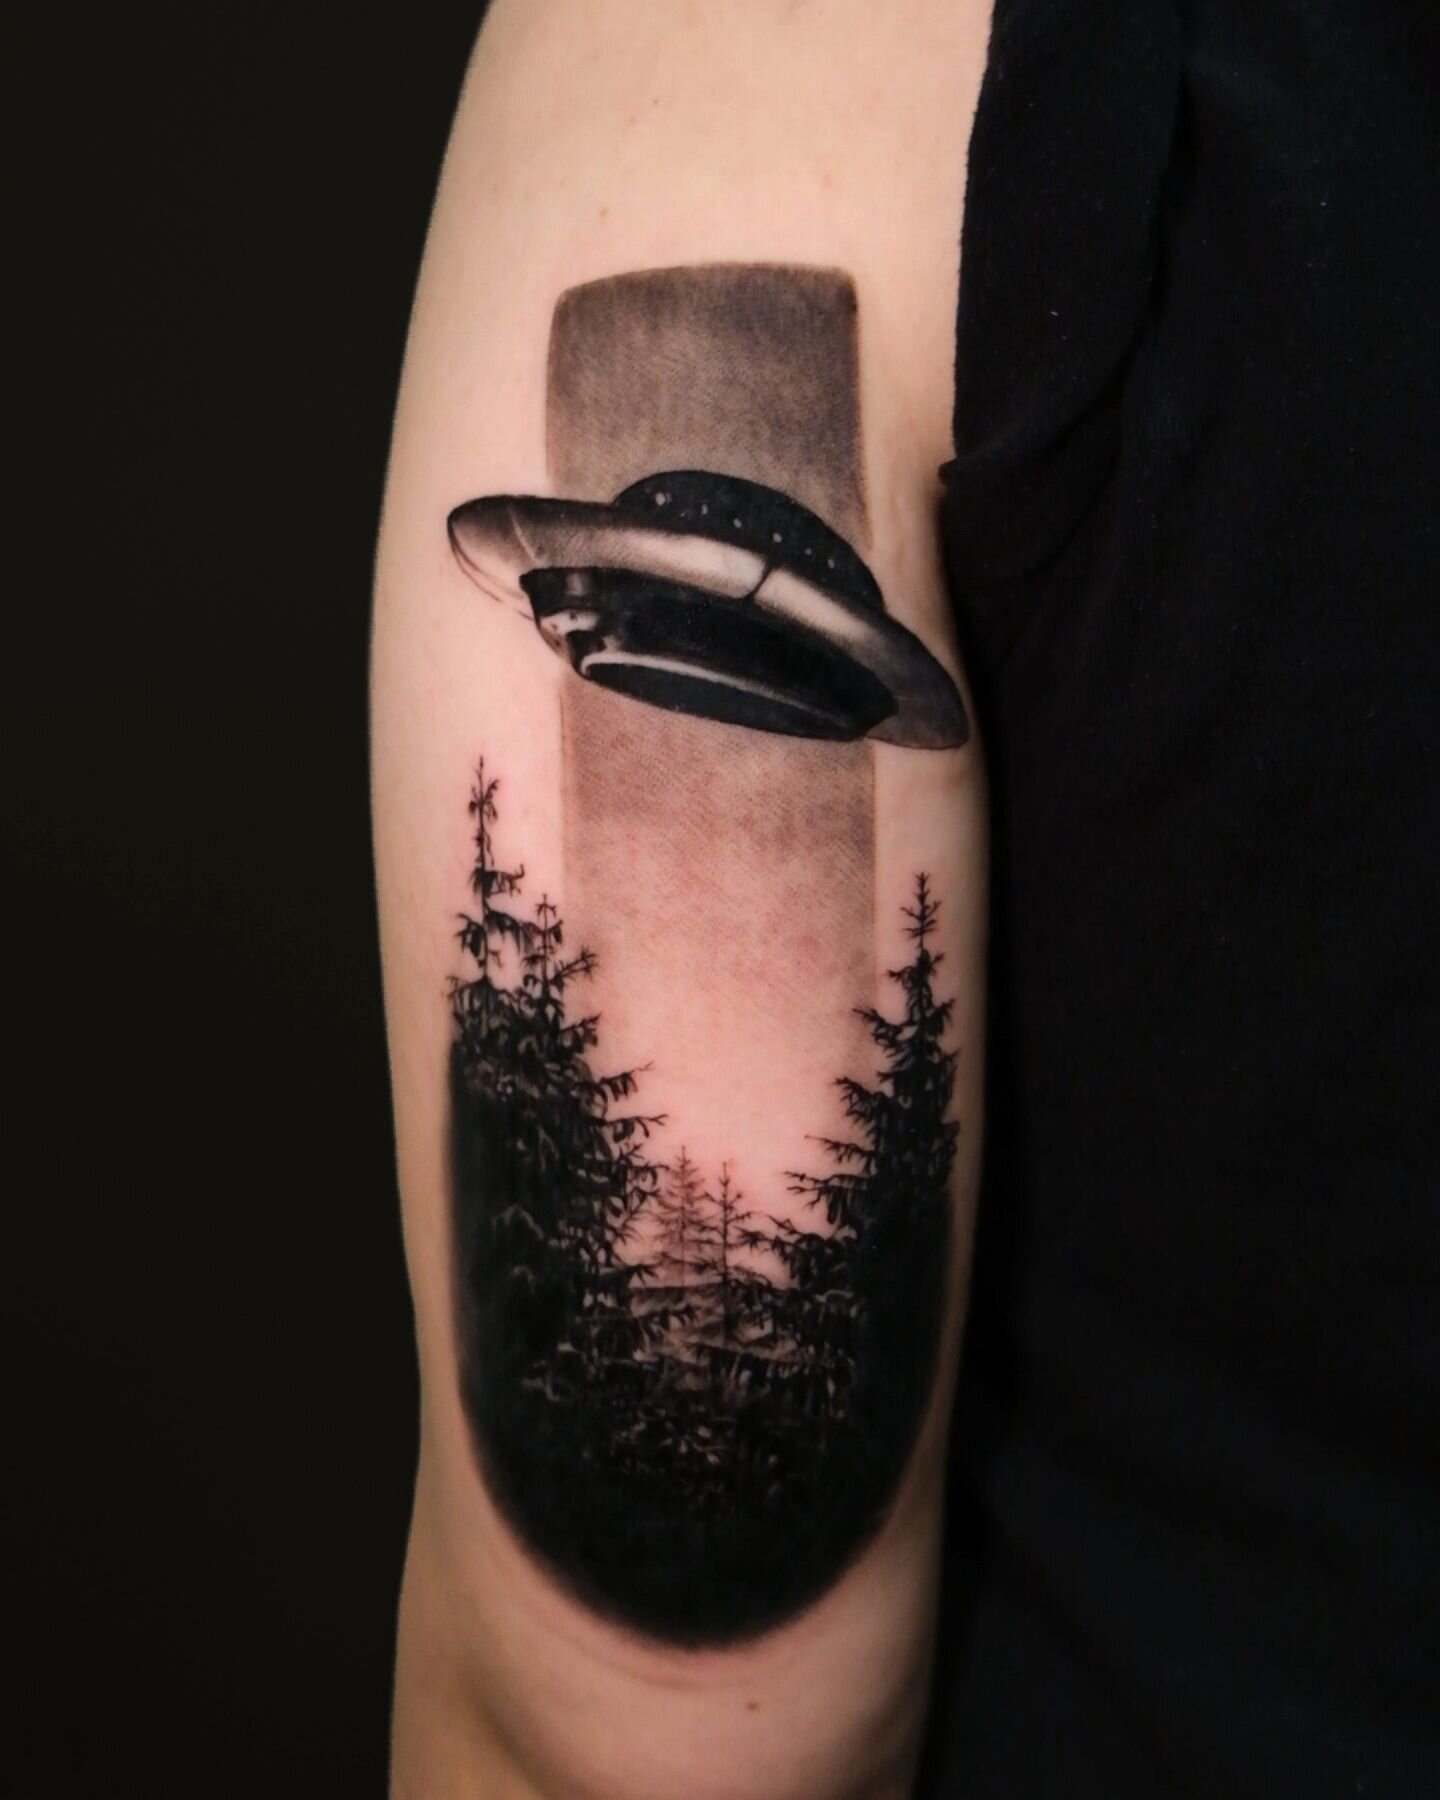 🛸 I WANT TO BELIEVE🛸
🏆 Achievement Unlocked 🏆
.
The first (and hopefully not last) X-Files tattoo of my career! 

My client Forest asked me to do my (subtle) spin on the classic poster hanging in Fox Mulder's office. We also wanted to nod to the 